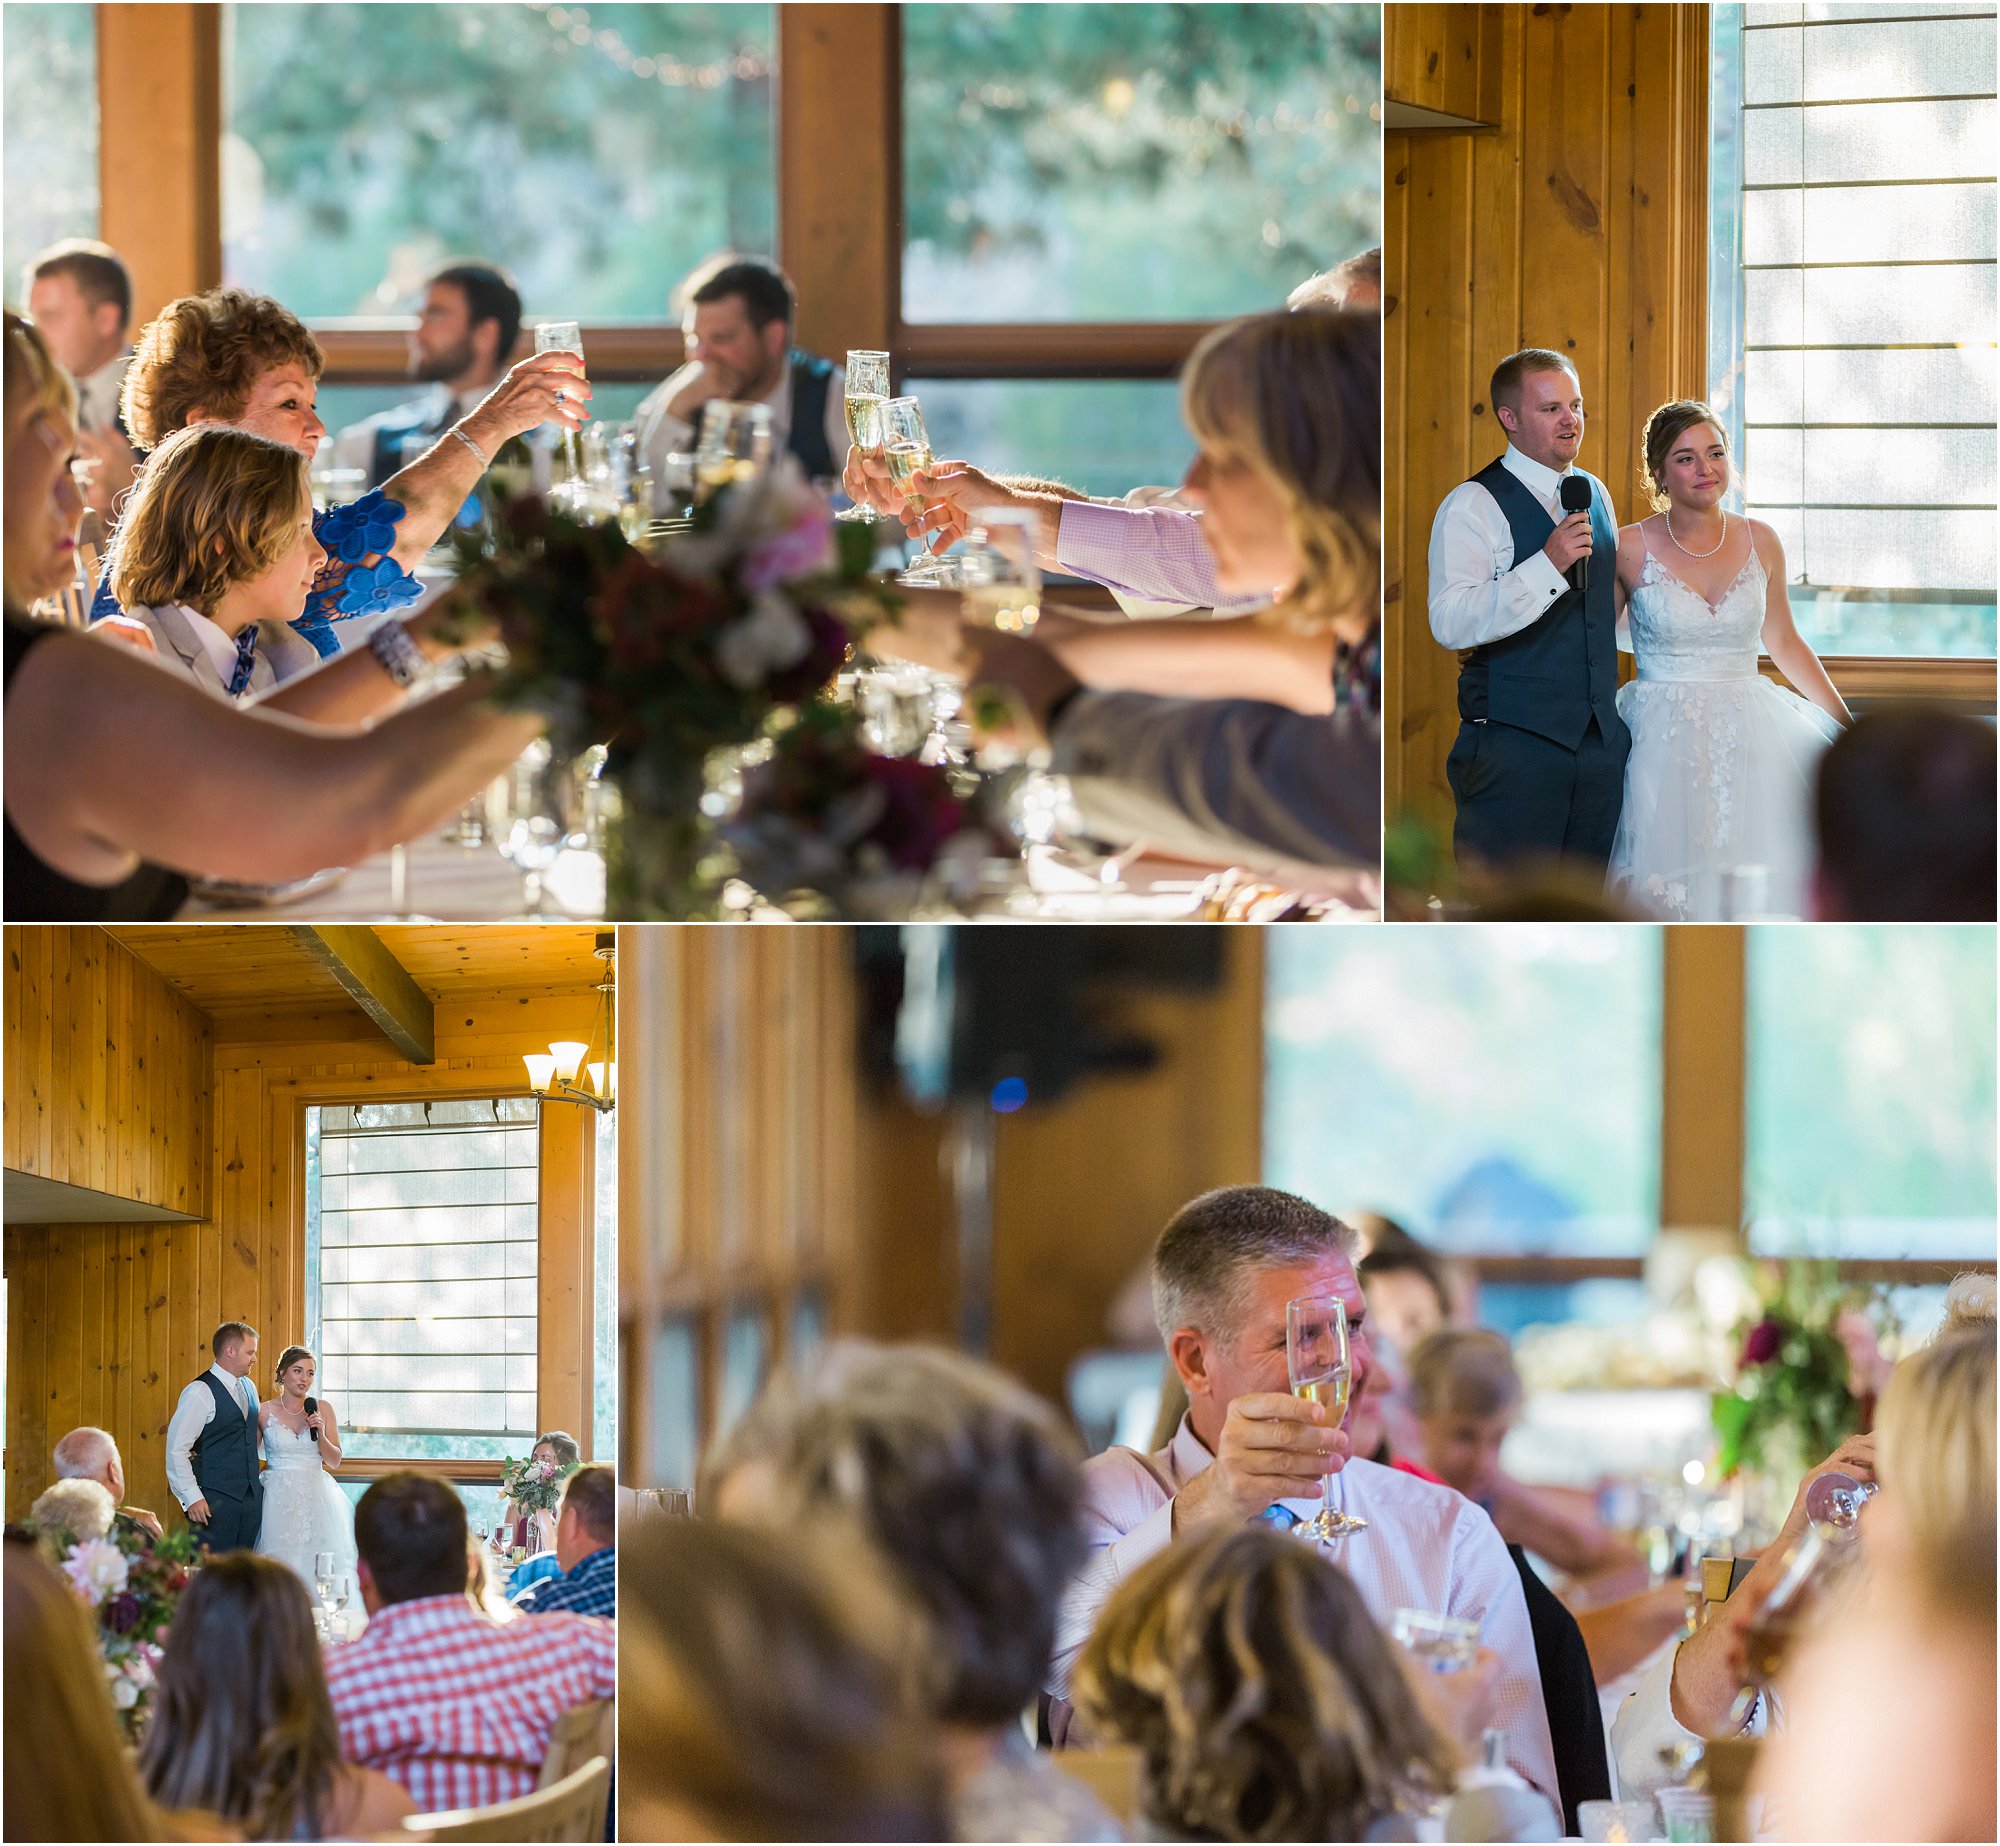 Guests toast each other during the speeches at this rustic Rock Springs Ranch Wedding in Bend, OR. | Erica Swantek Photography